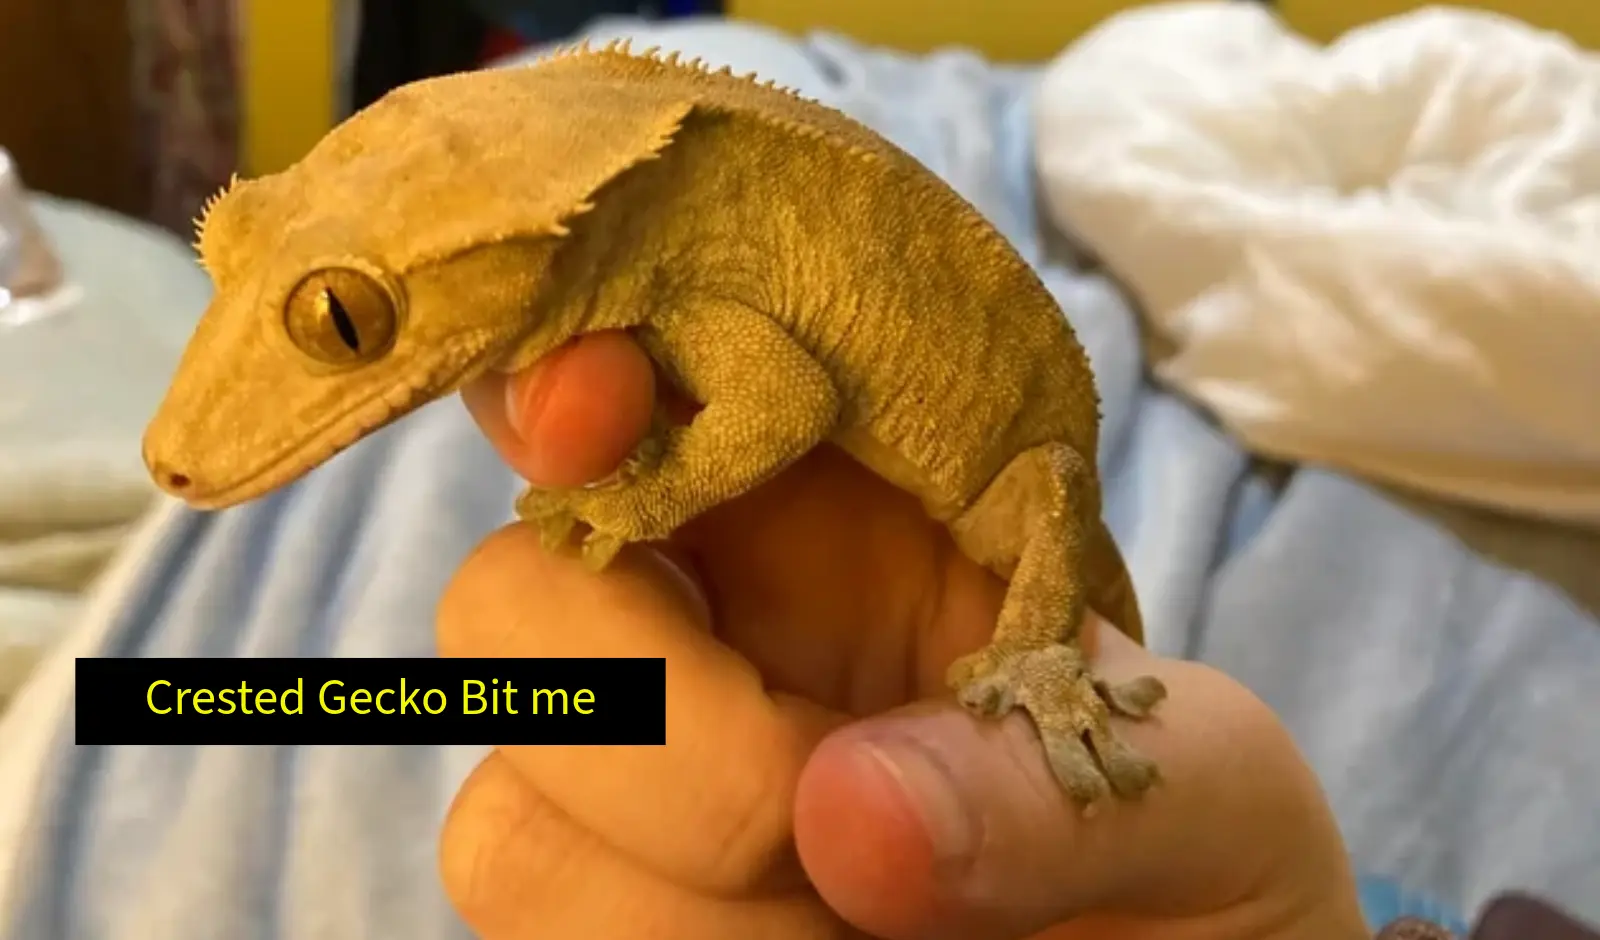 Crested-Gecko-Bit-Me-Now-What-Should-I-Do